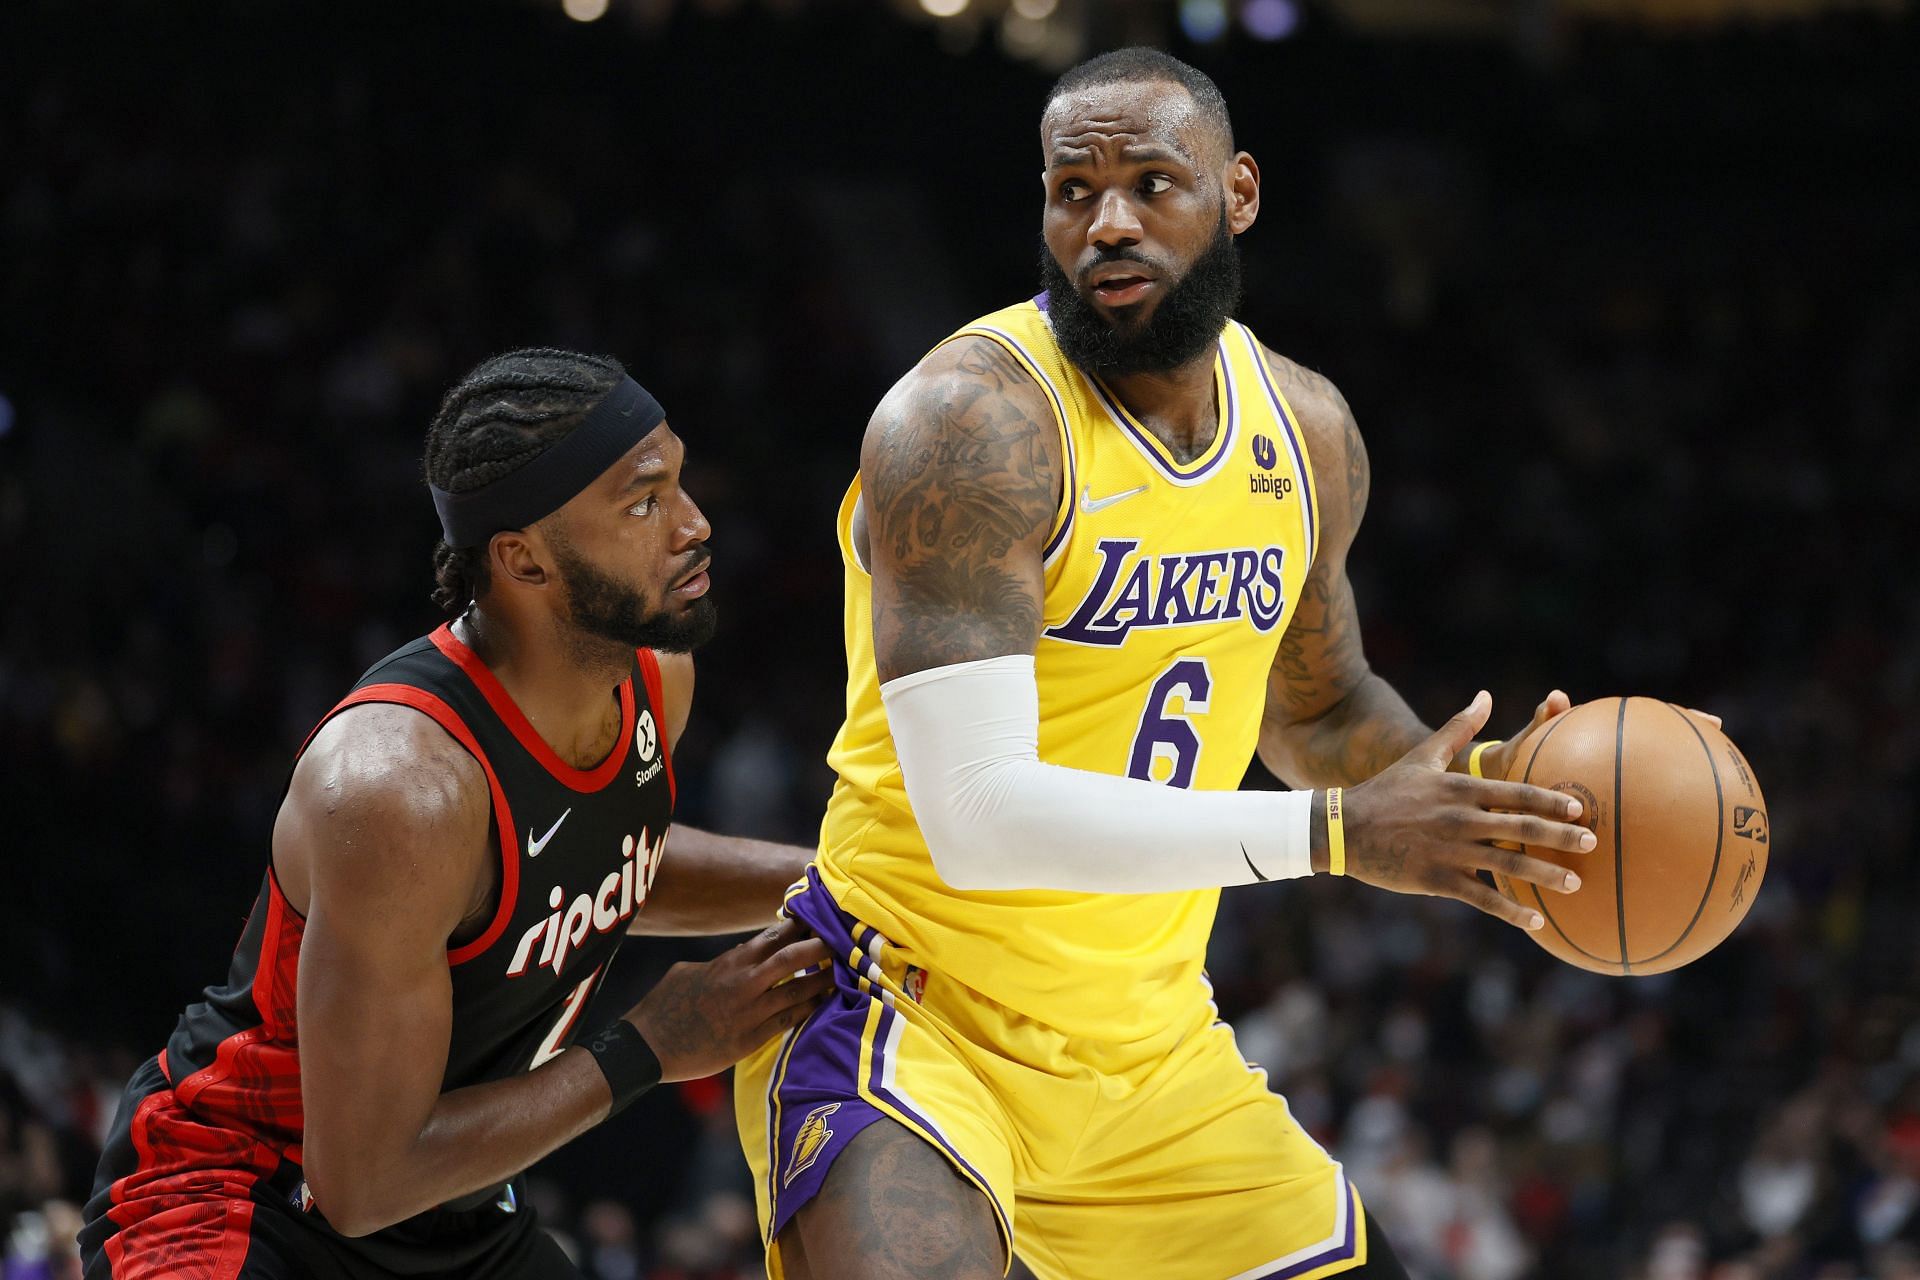 LeBron James of the LA Lakers dribbles against Justise Winslow of the Portland Trail Blazers.